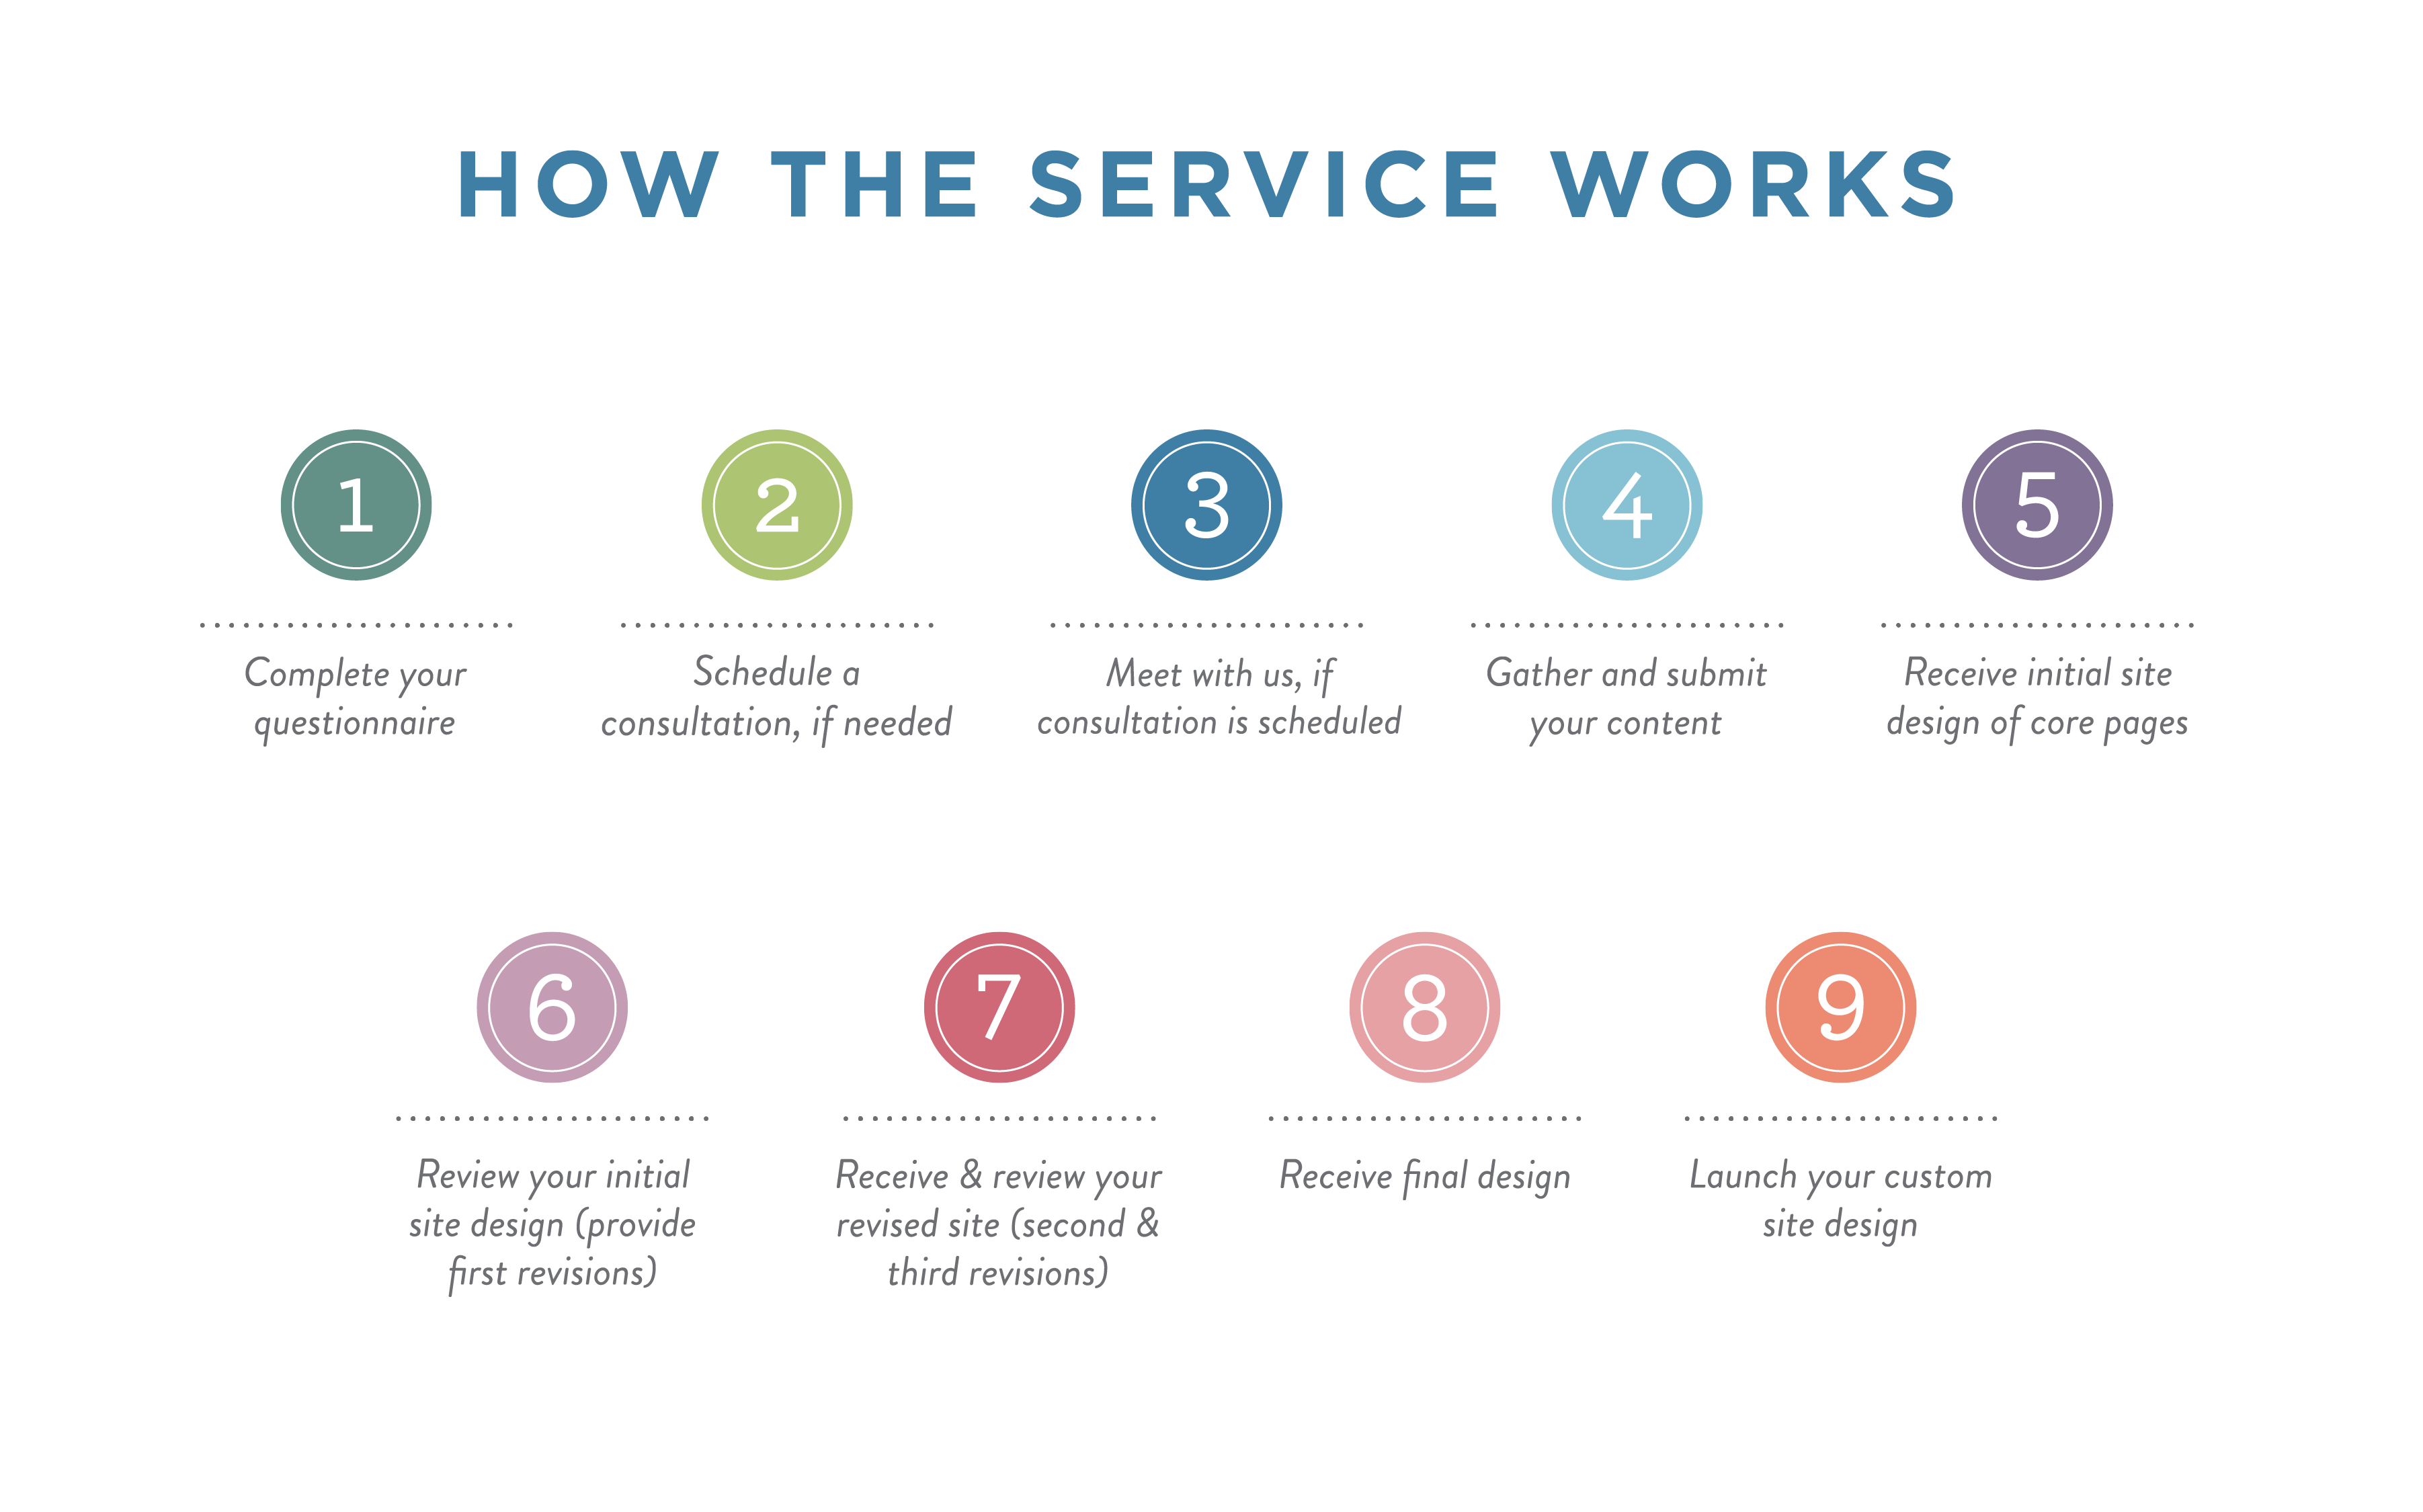 Infographic detailing the nine steps of the service, if you need an accessible version please select the link labeled 'review more details' below.